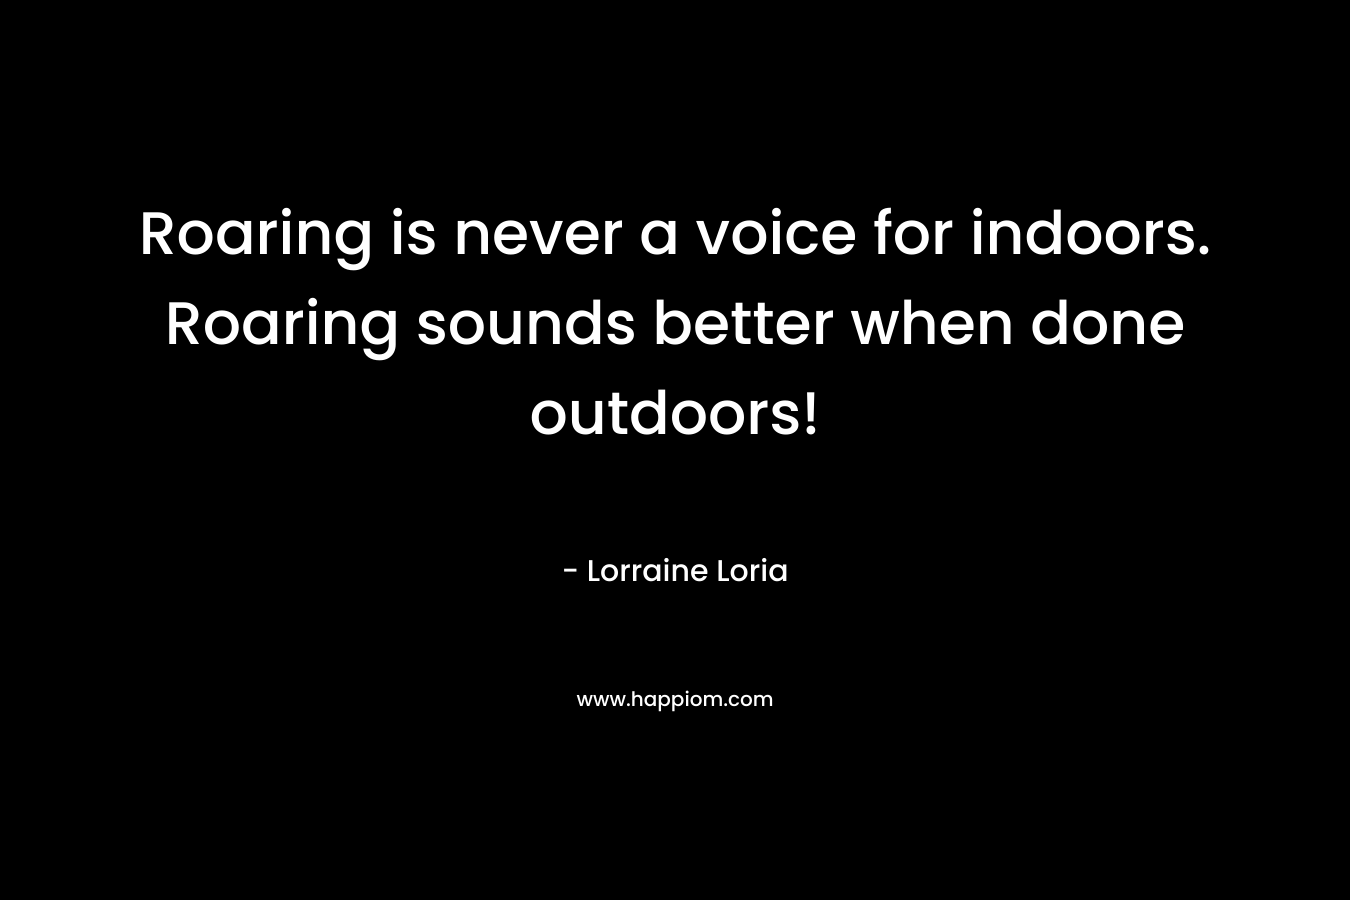 Roaring is never a voice for indoors. Roaring sounds better when done outdoors! – Lorraine Loria